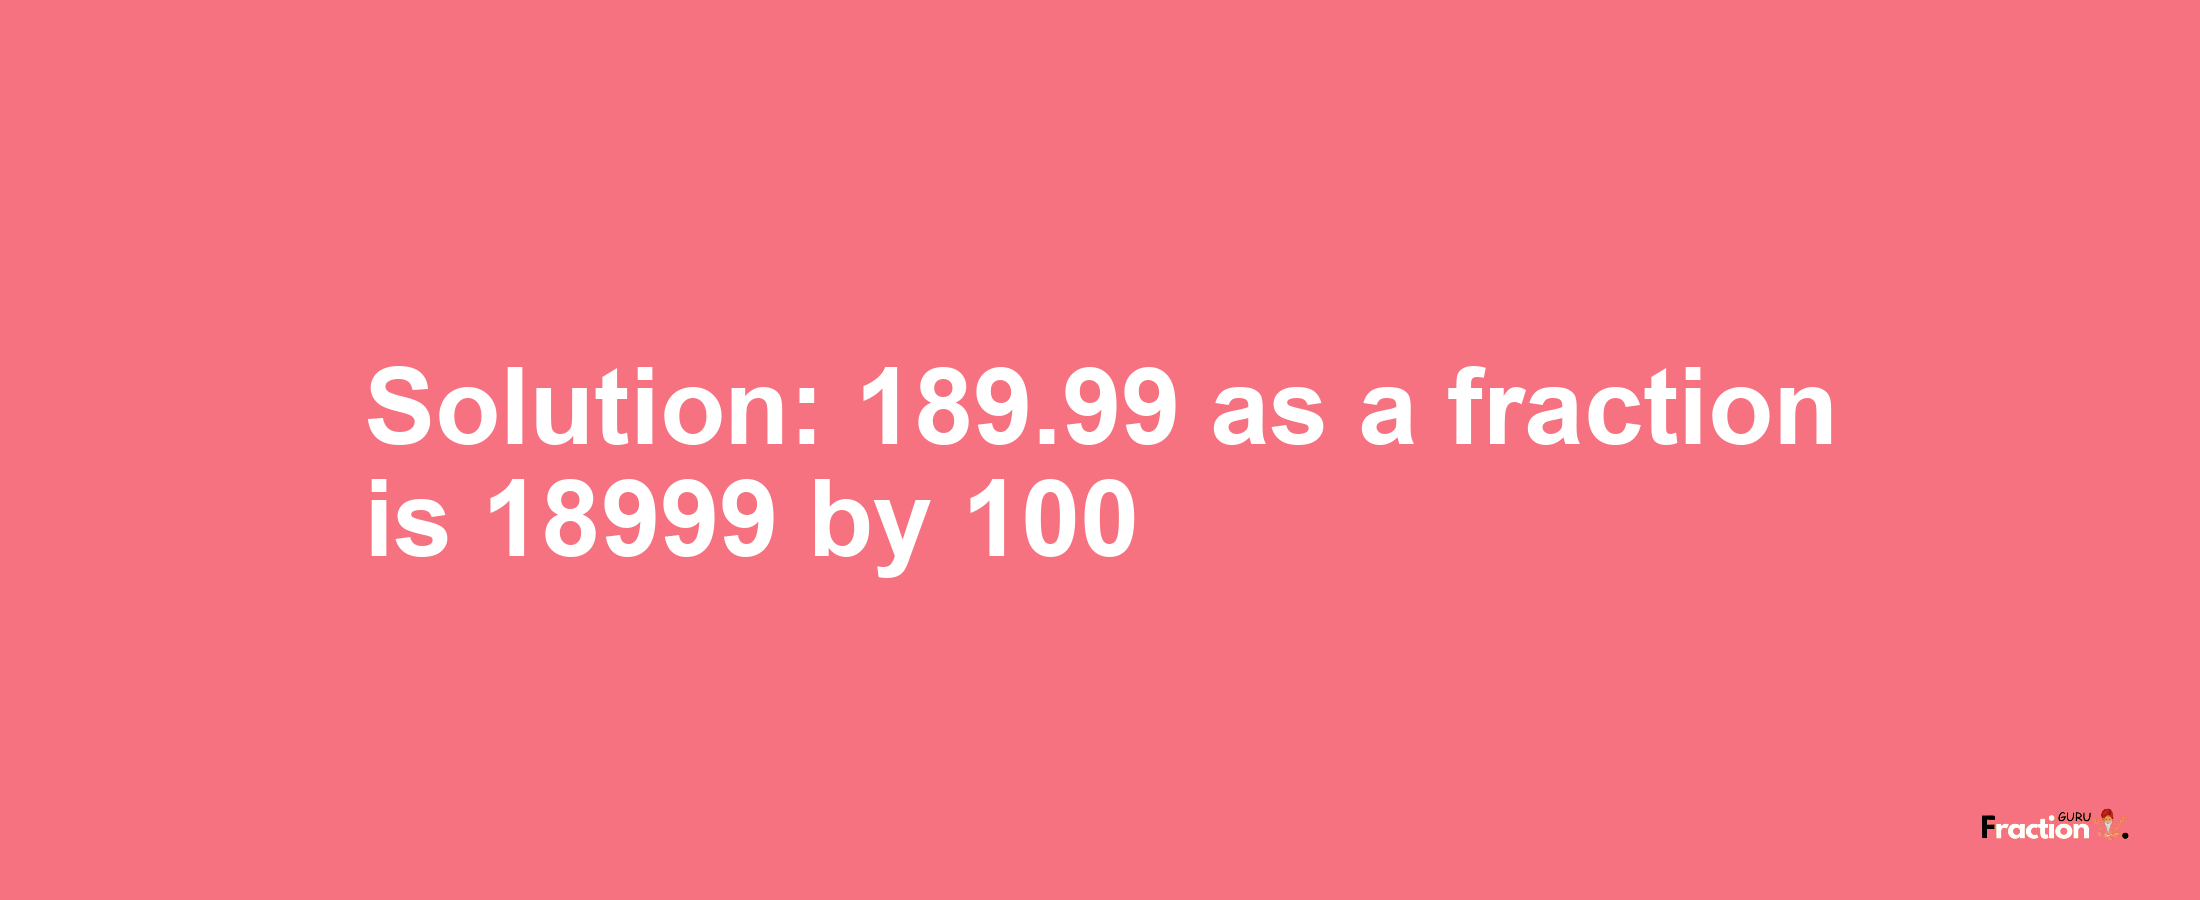 Solution:189.99 as a fraction is 18999/100